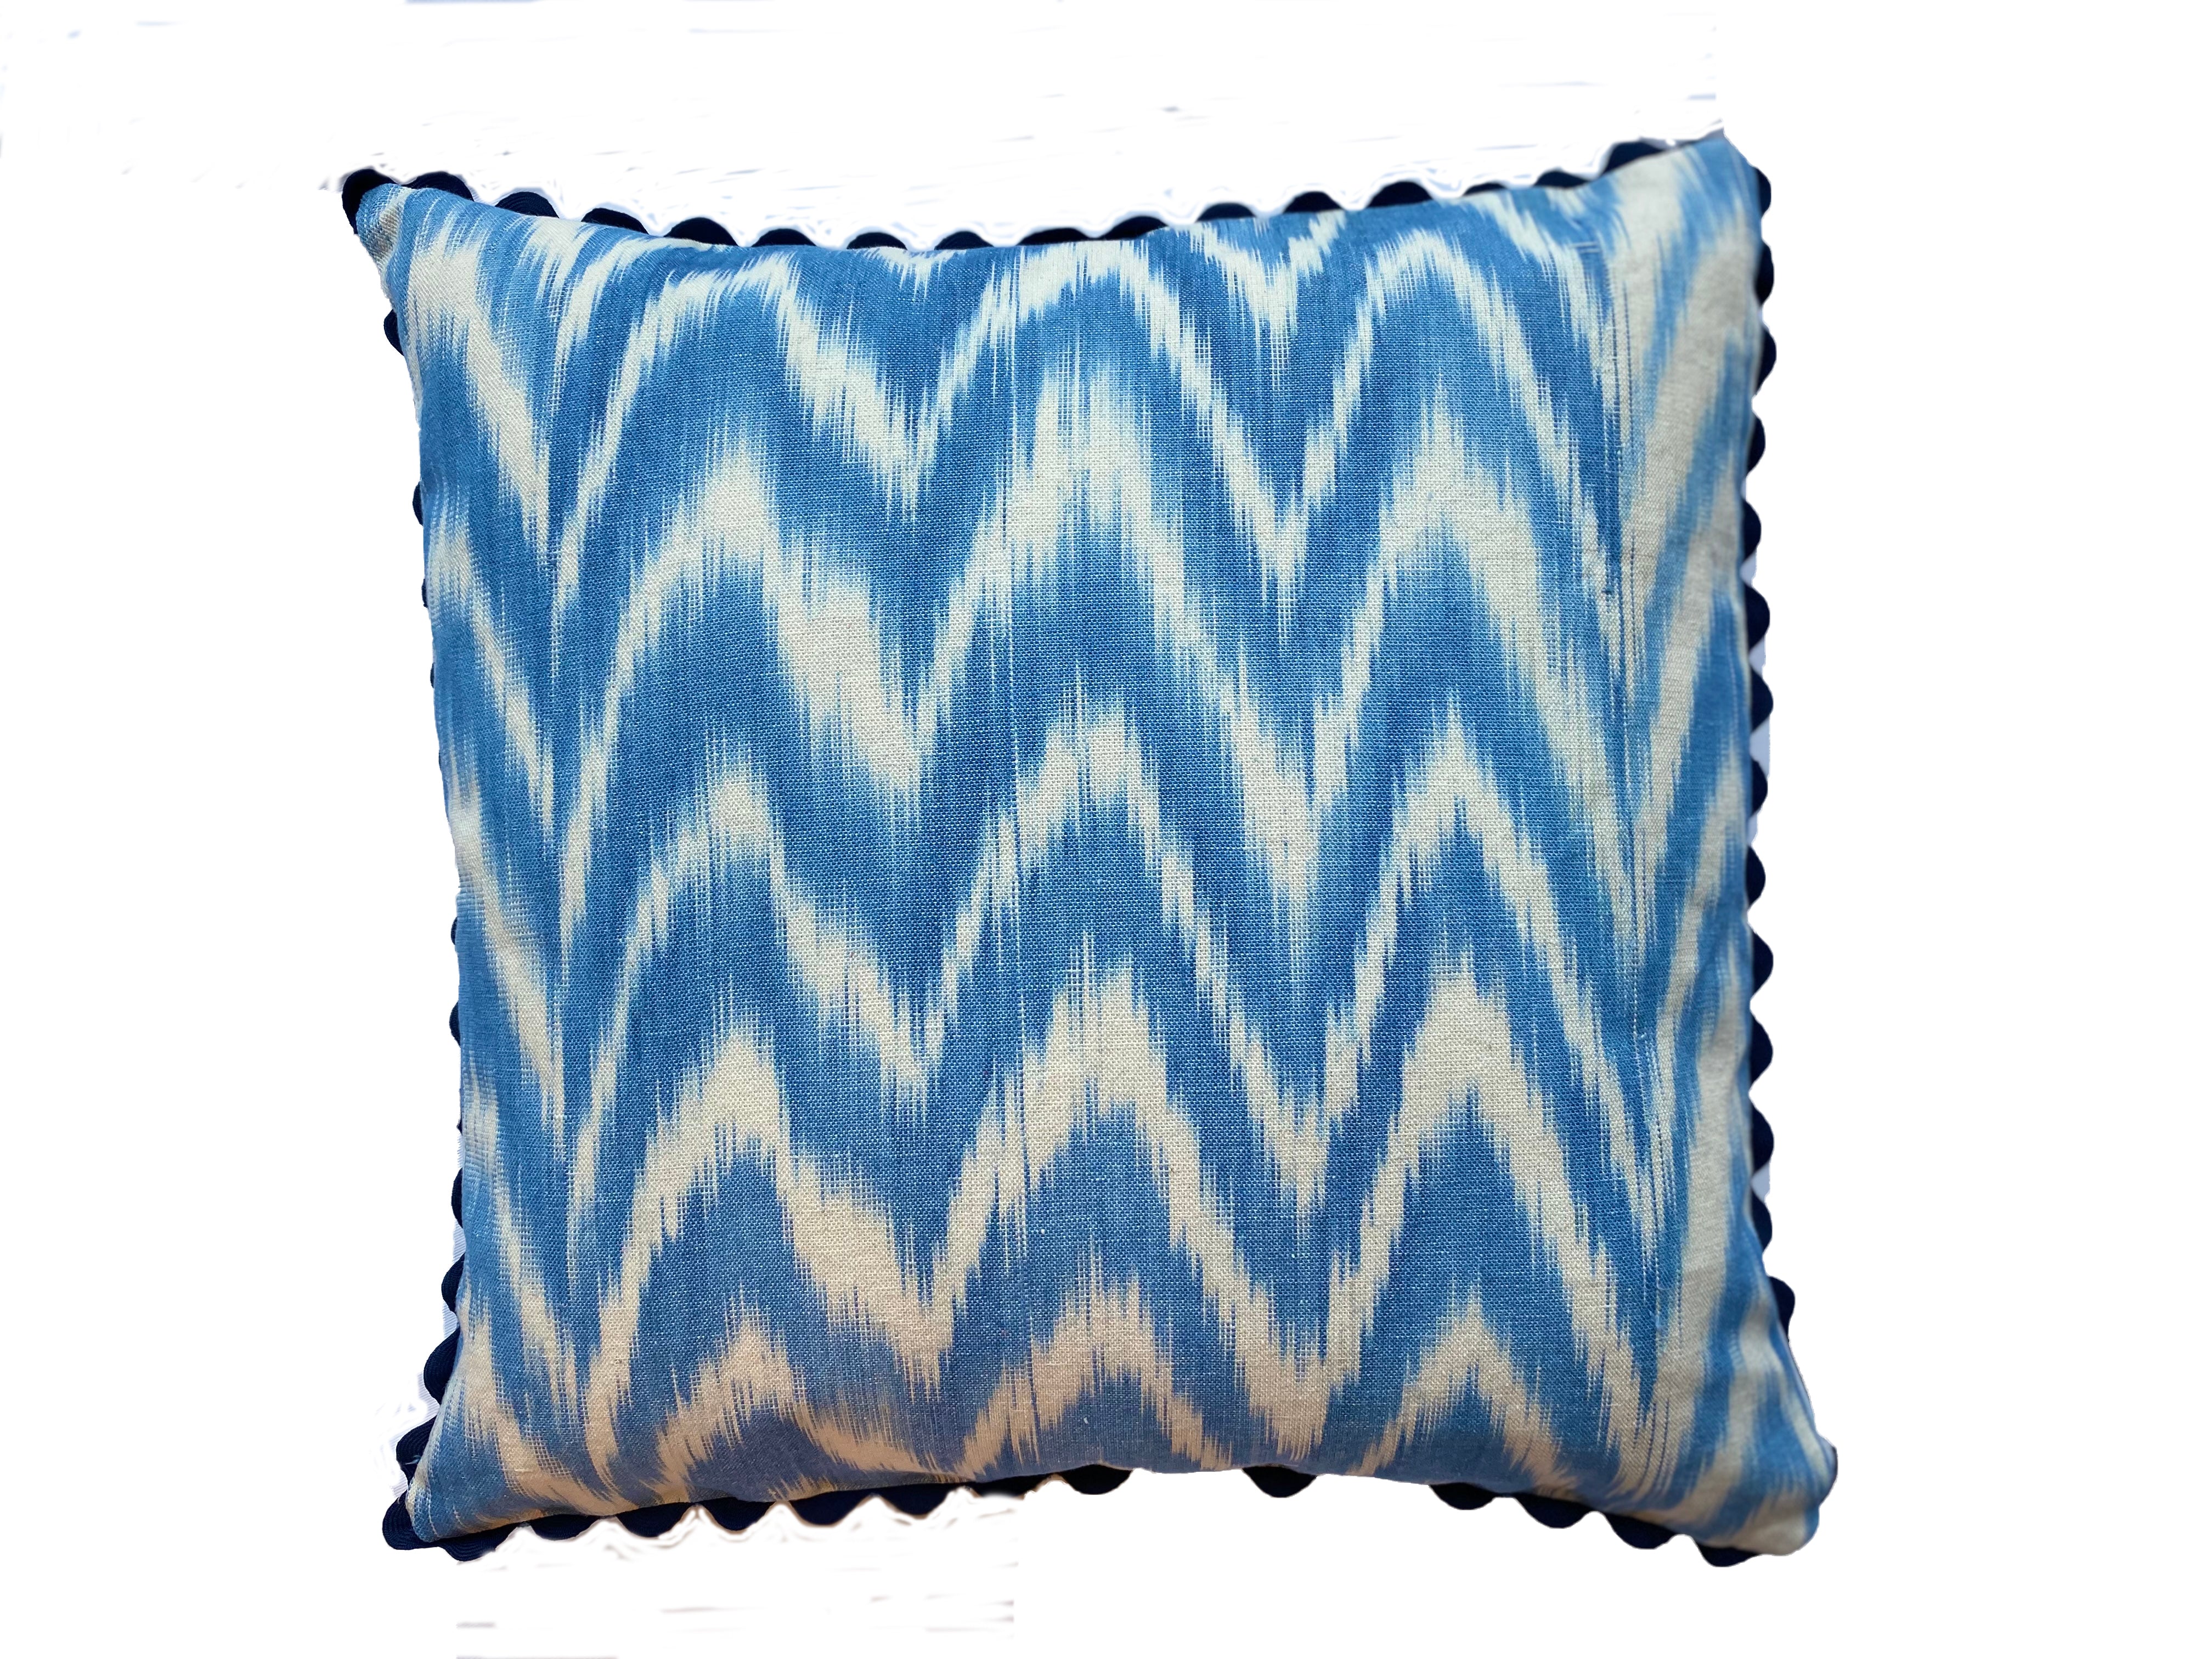 MALLORCAN FABRIC CUSHION - SKY BLUE FLAMESTITCH WITH NAVY SCALLOP EDGING